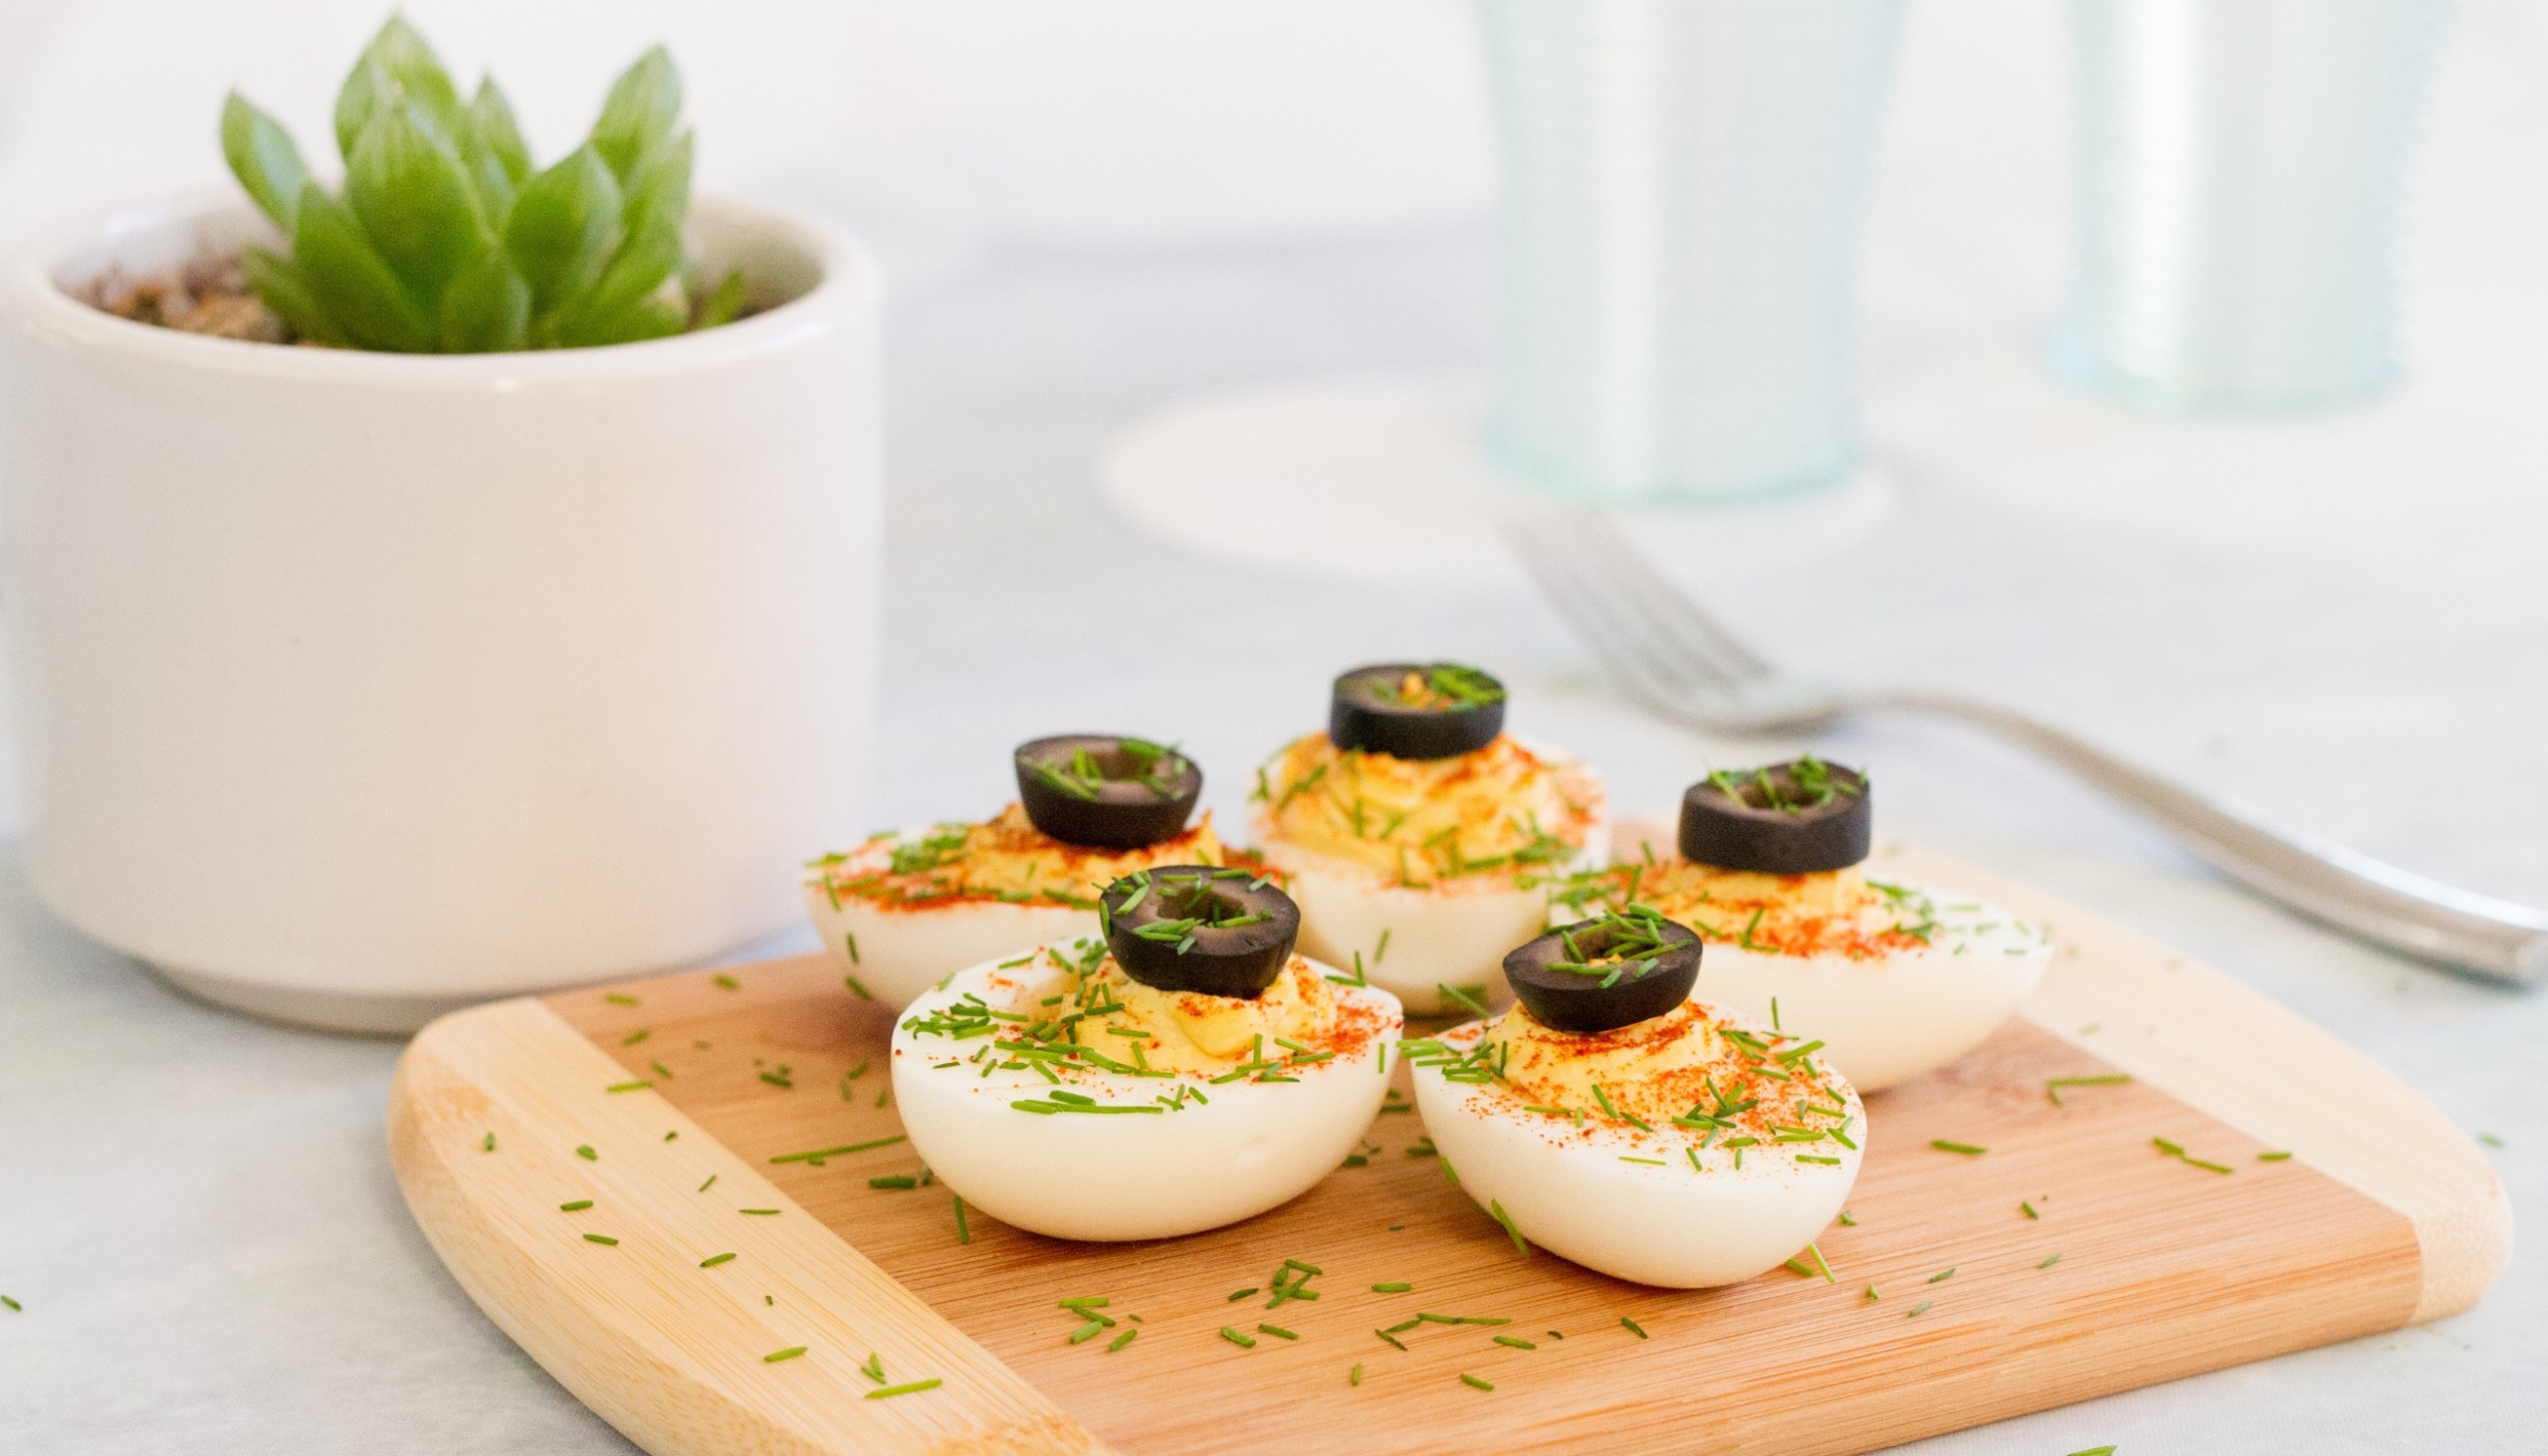 TANGY DEVILED EGGS MADE WITH YUMM SAUCE